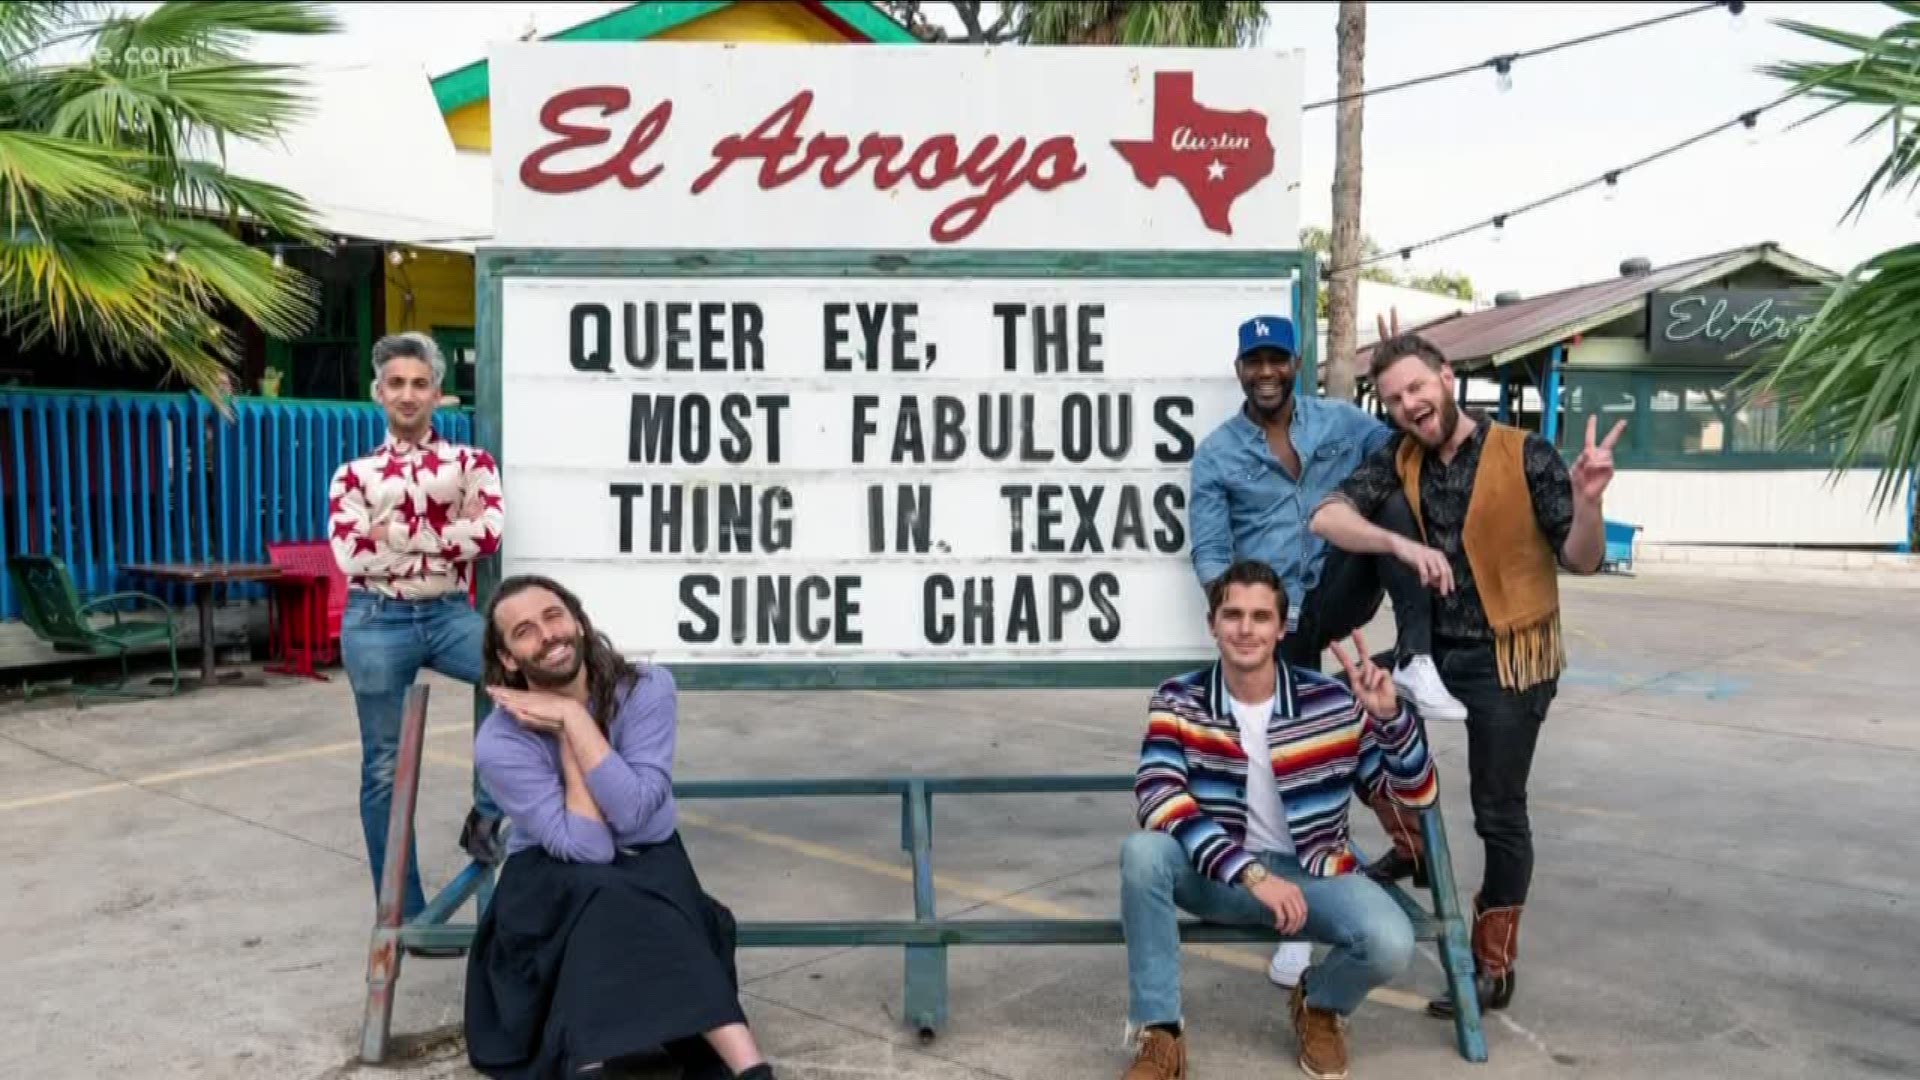 Producers announced that the sixth season of "Queer Eye" is being filmed in Central Texas.